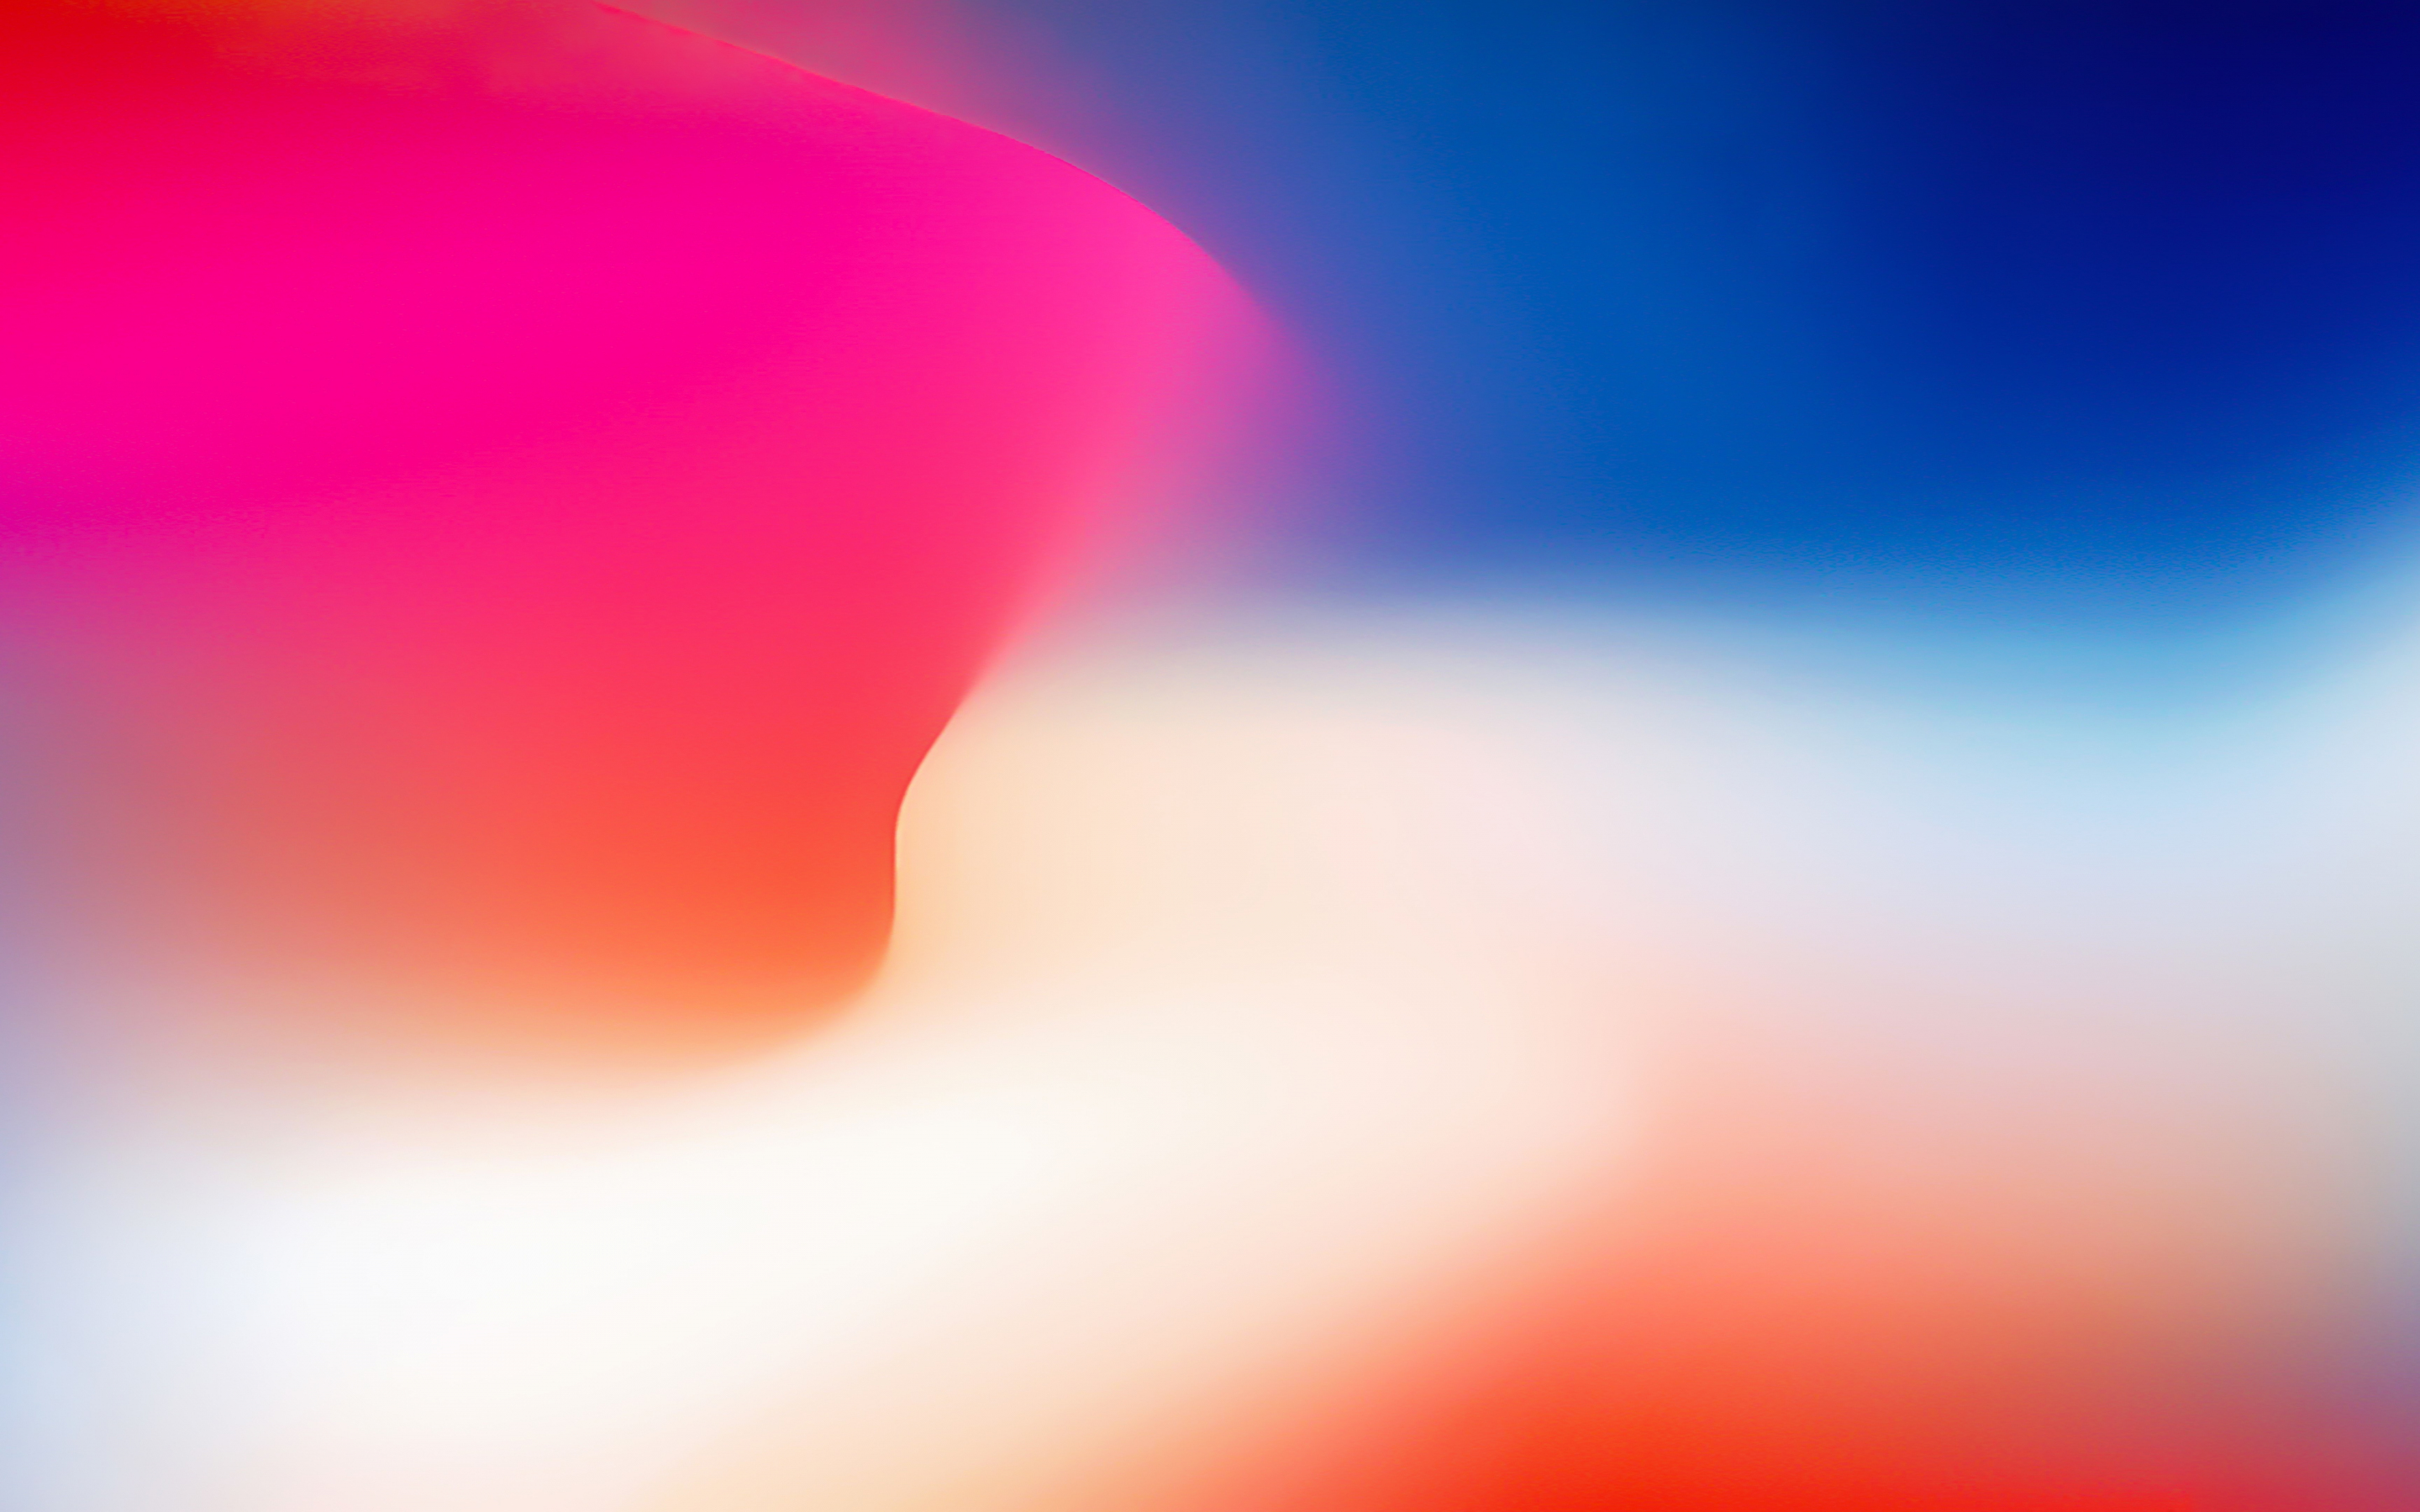 Iphone x, stock, colorful gradient, abstract, 2880x1800 wallpaper